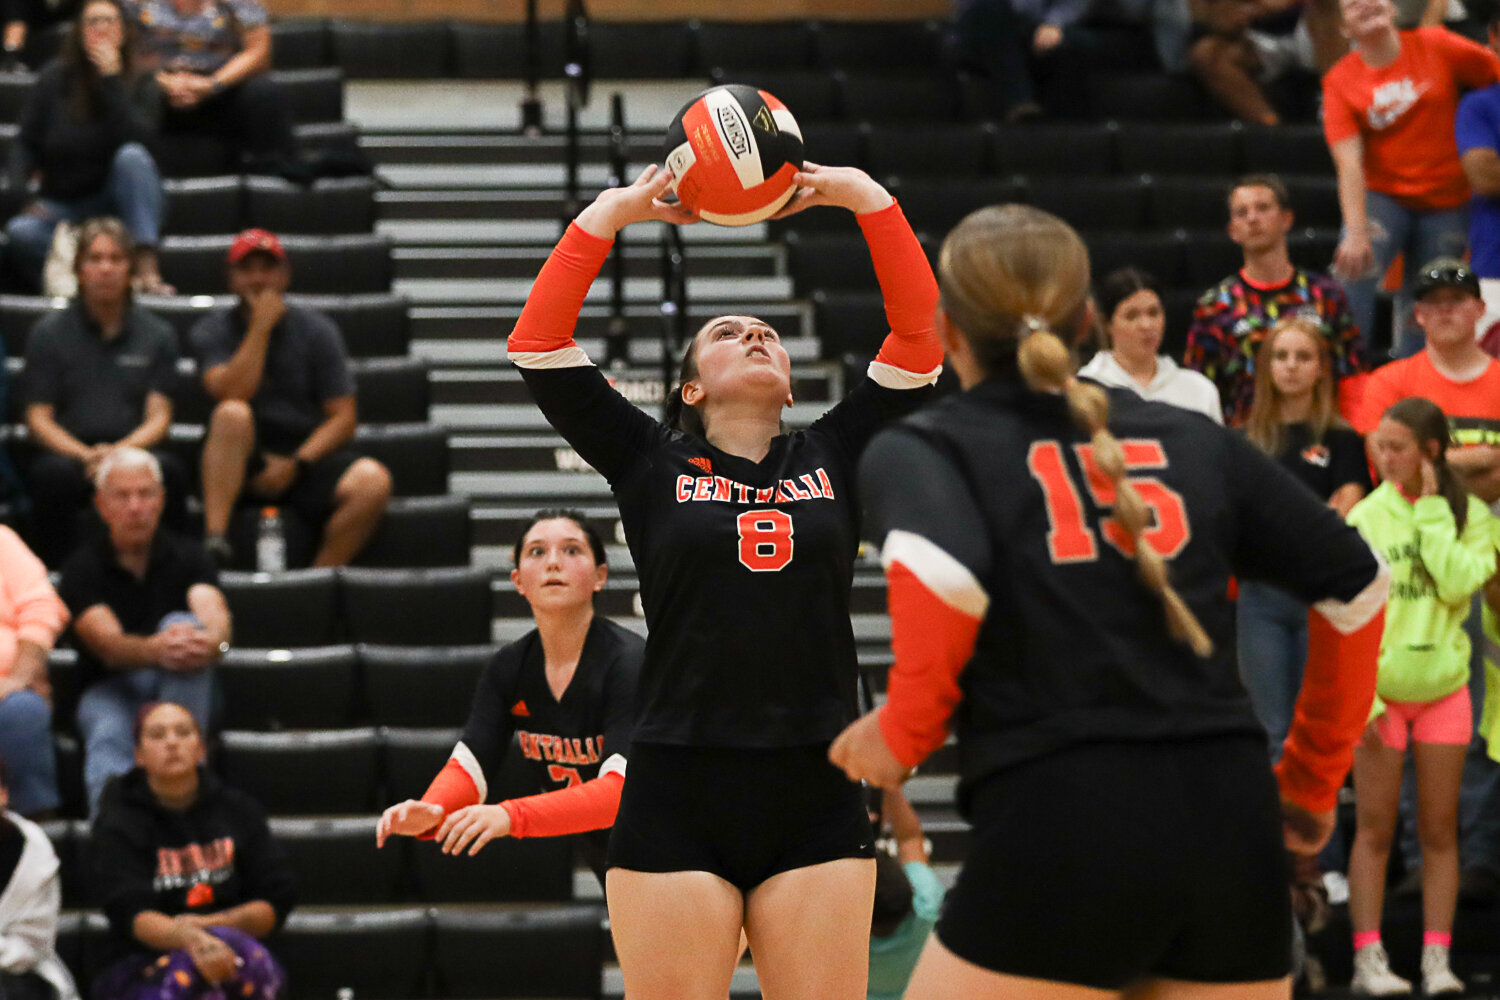 Selah Calkins sets the ball during the second set of Centralia's sweep of W.F. West on Sept. 21.